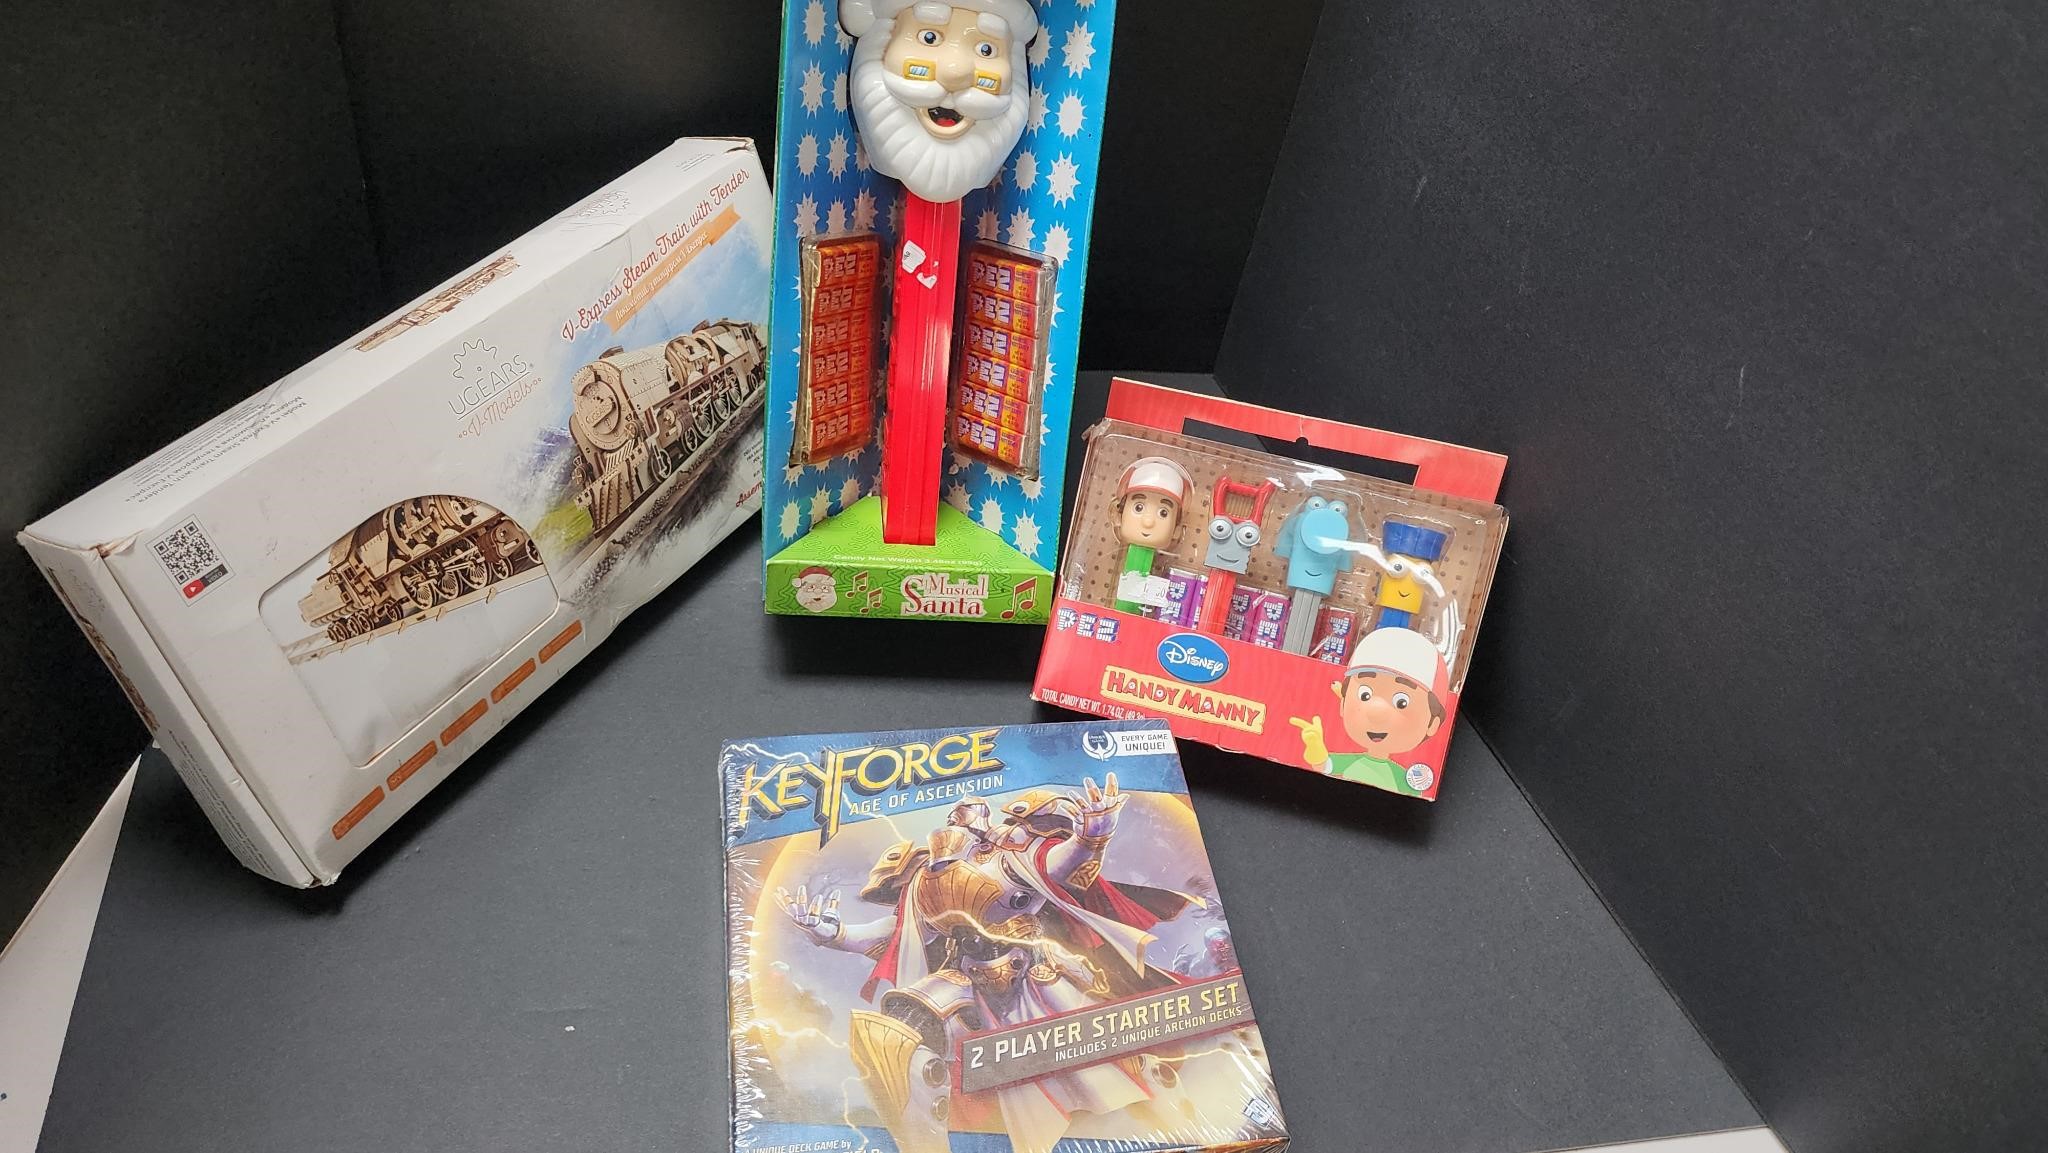 Pez Dispensers, Key Forge and Wooden Train Model